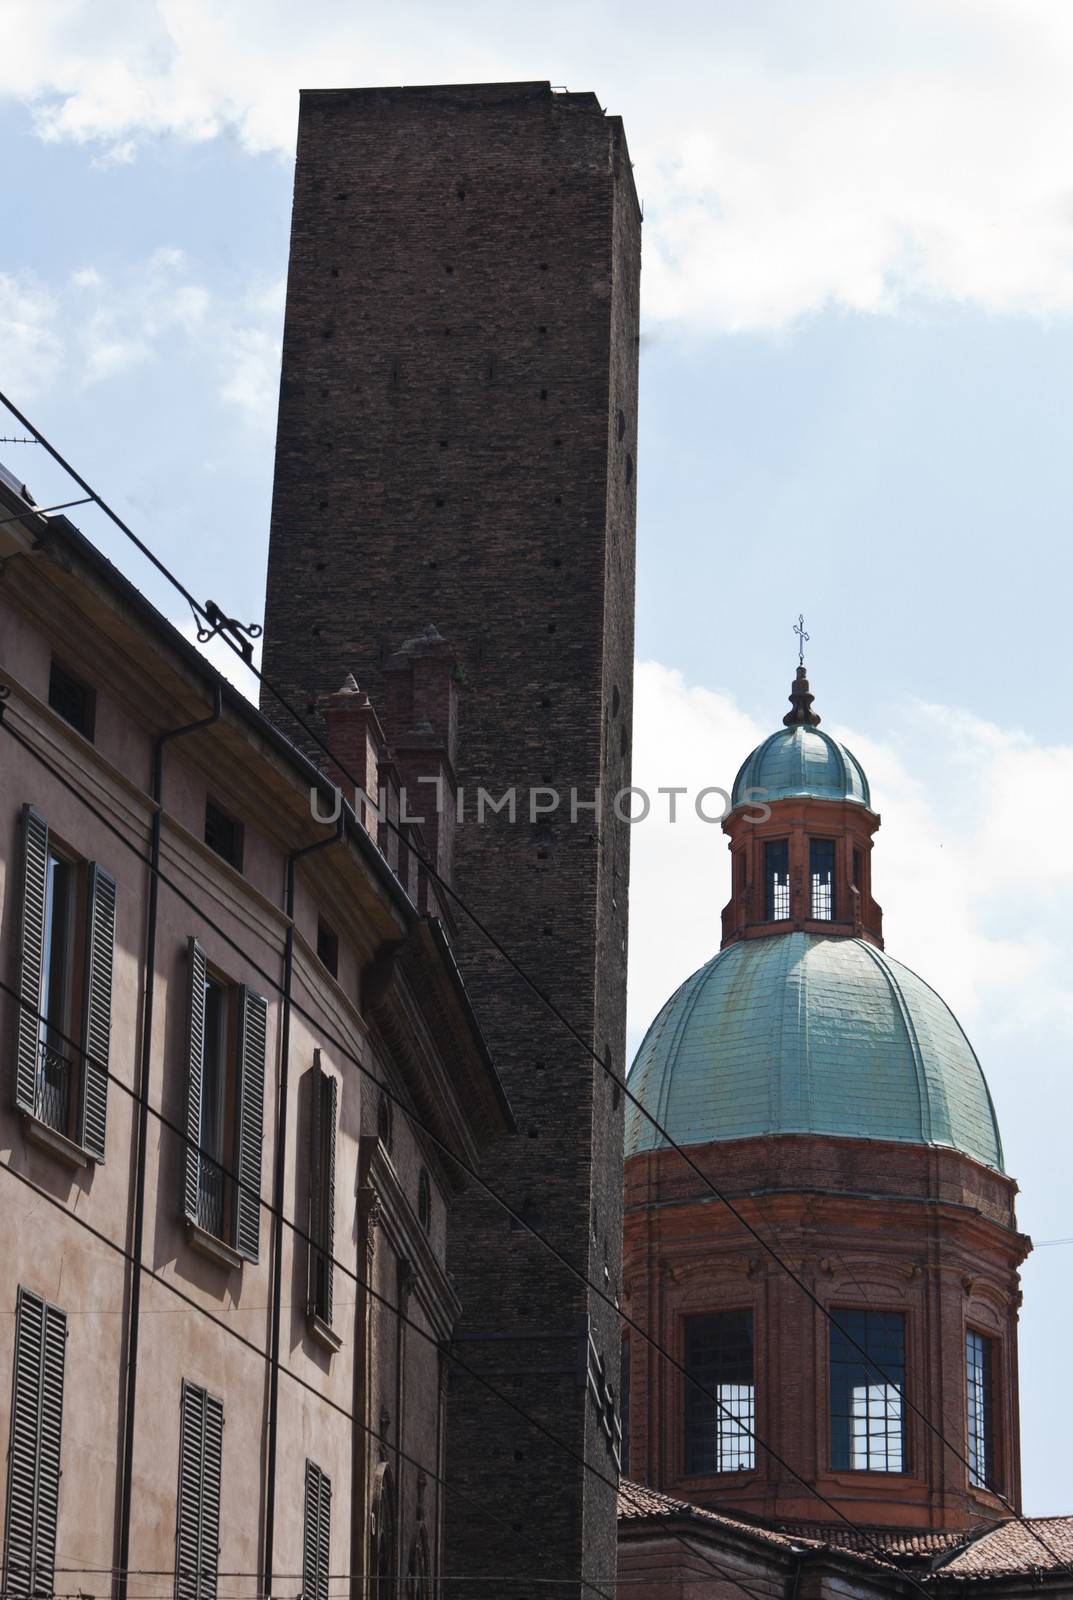 Asinelli tower and dome in Bologna by gandolfocannatella